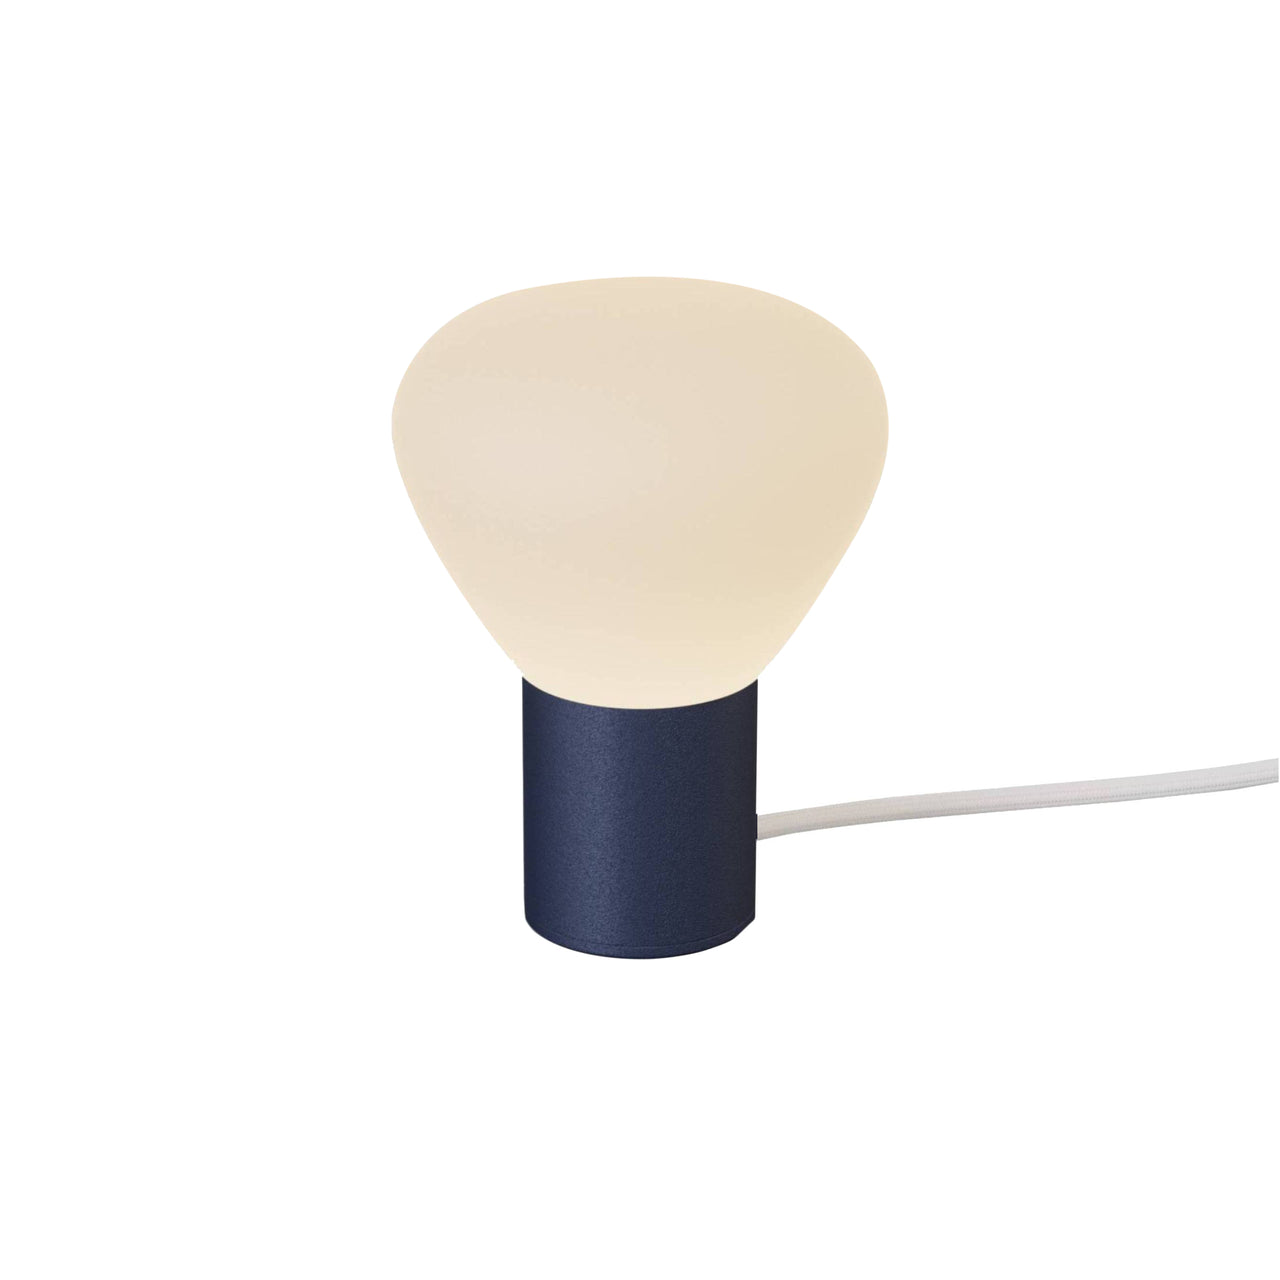 Parc 01 Table Lamp: Footswitch + Midnight Blue + White